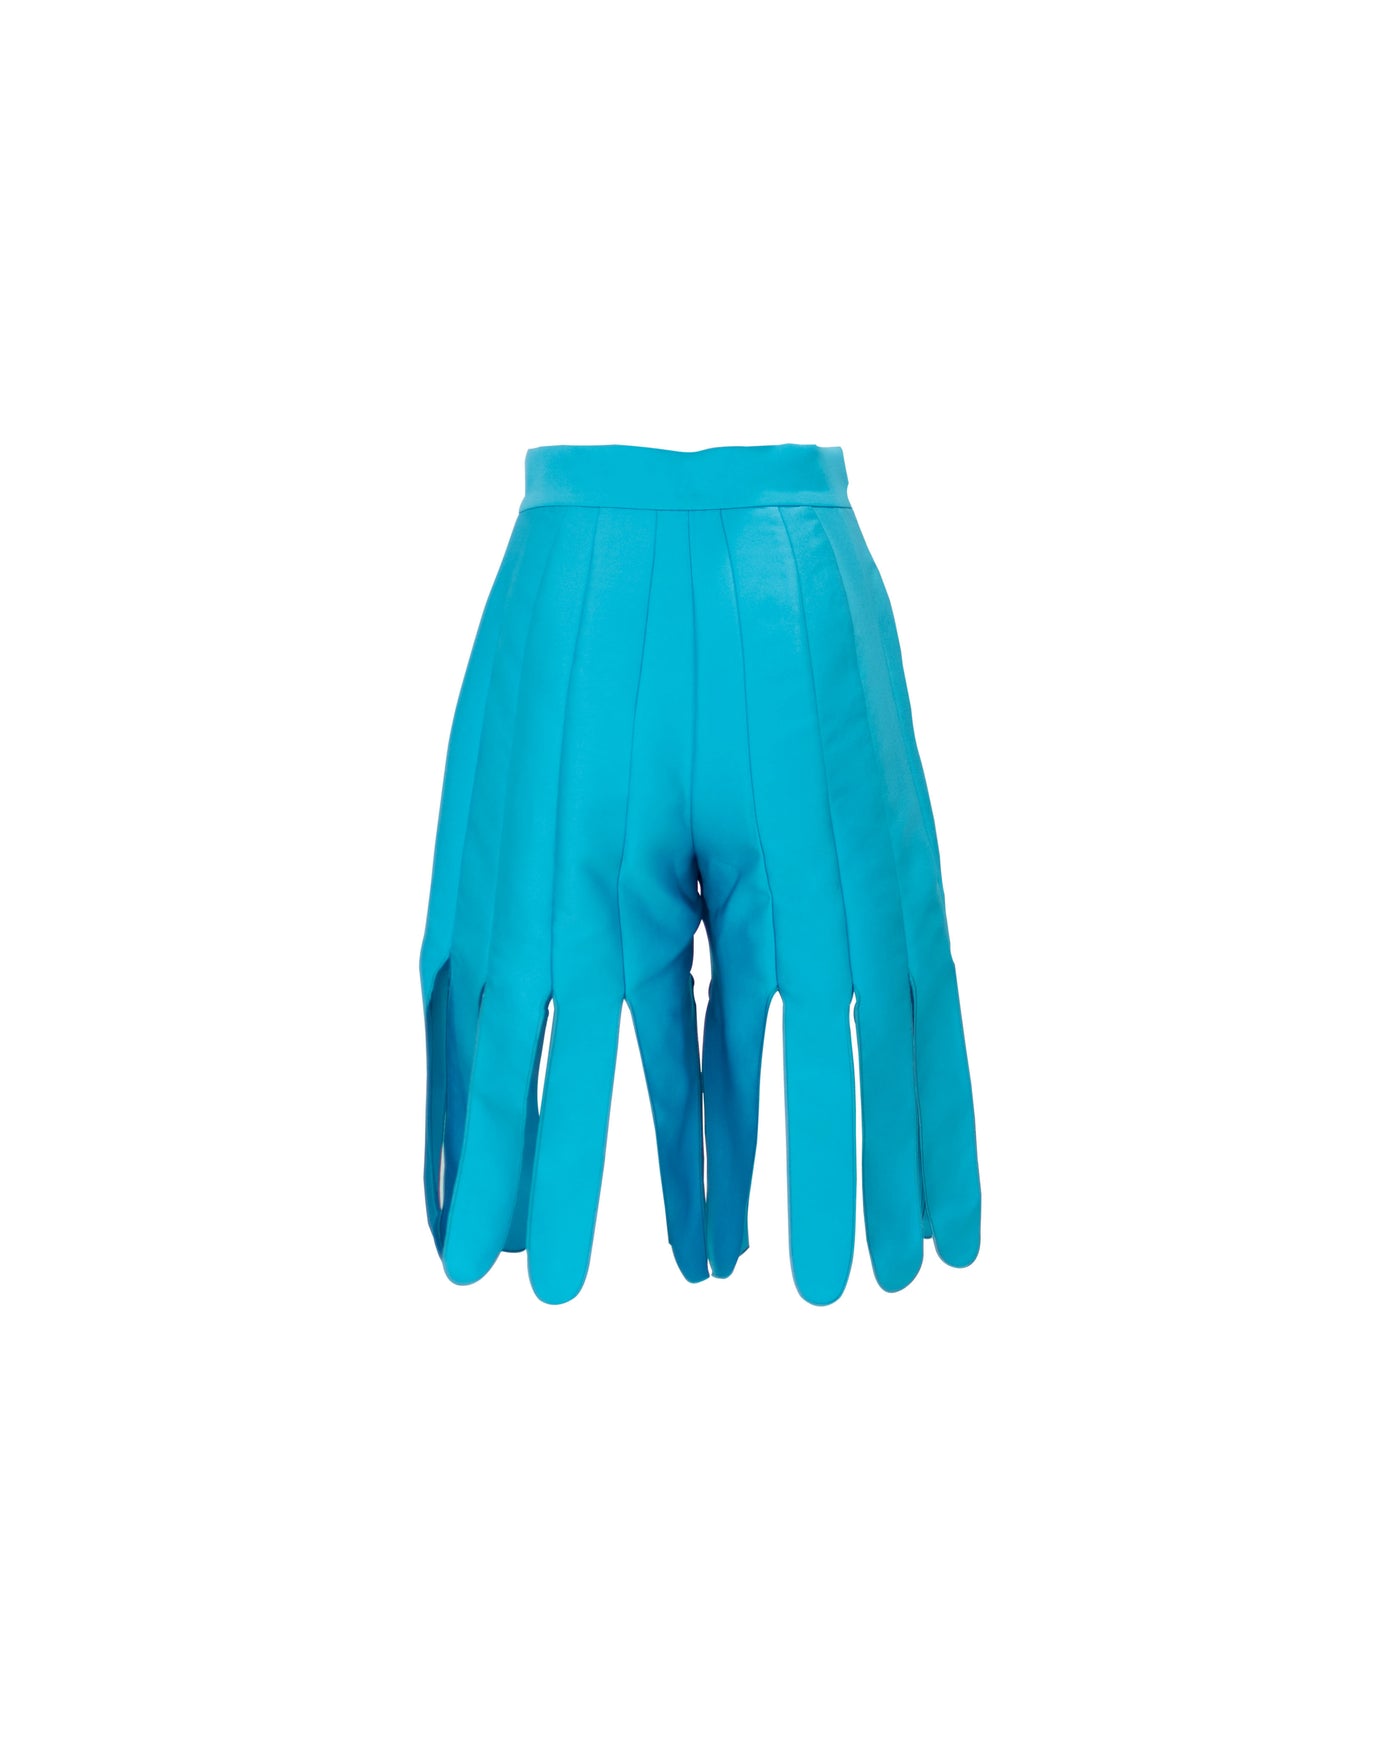 Spread Your Wings  - Shorts (Teal)